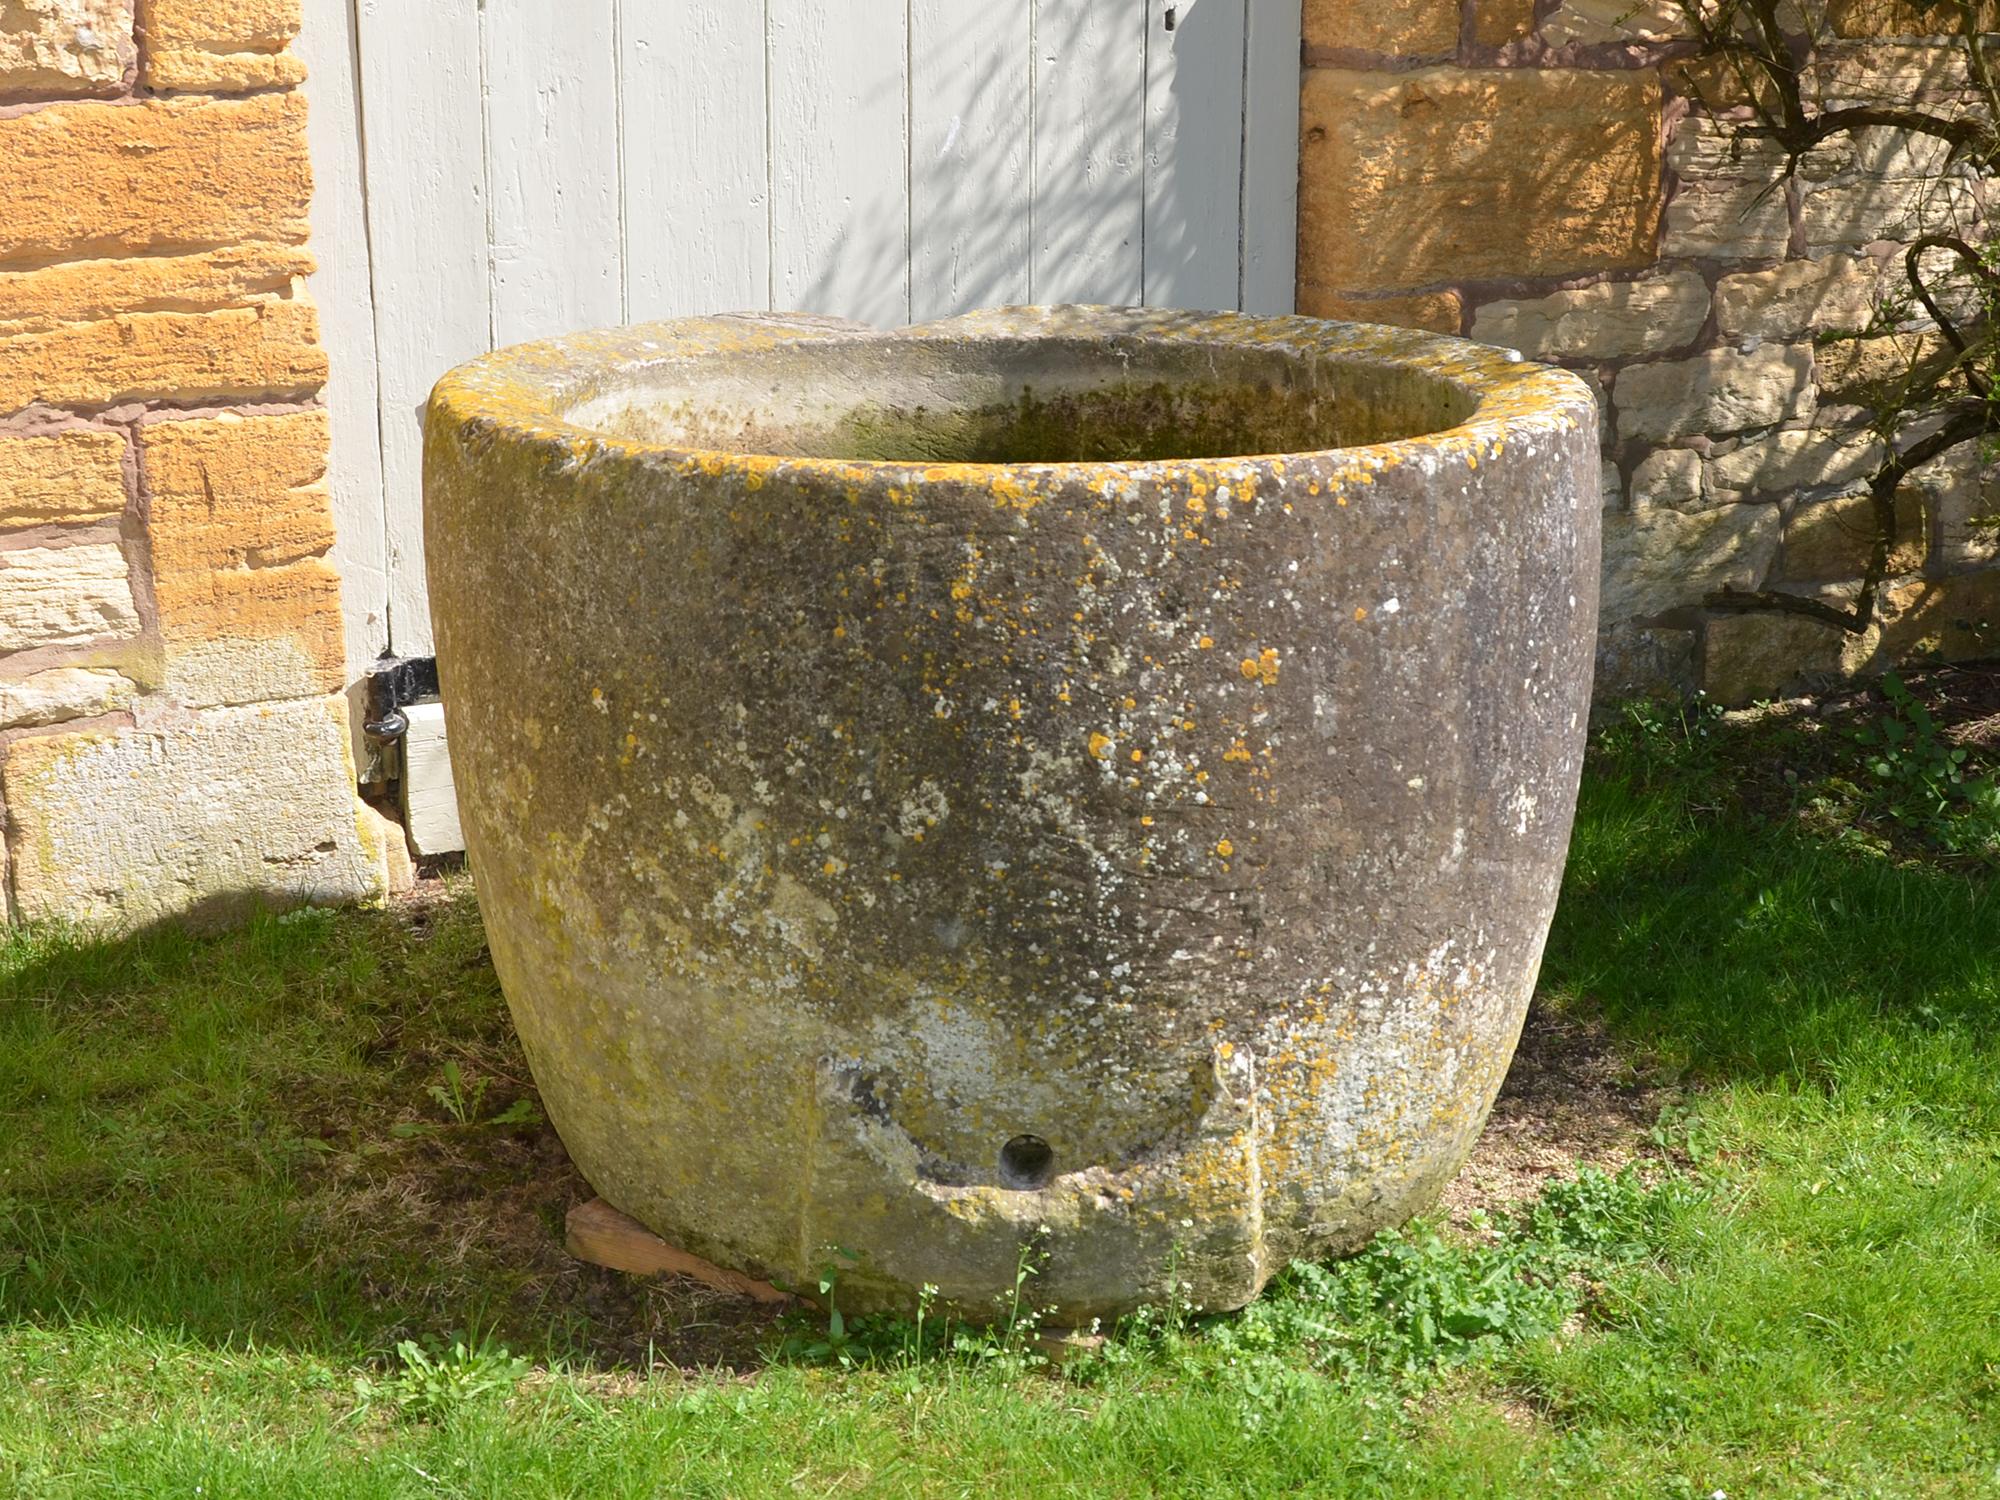 An 18th century circular stone trough with good weathering and patination.